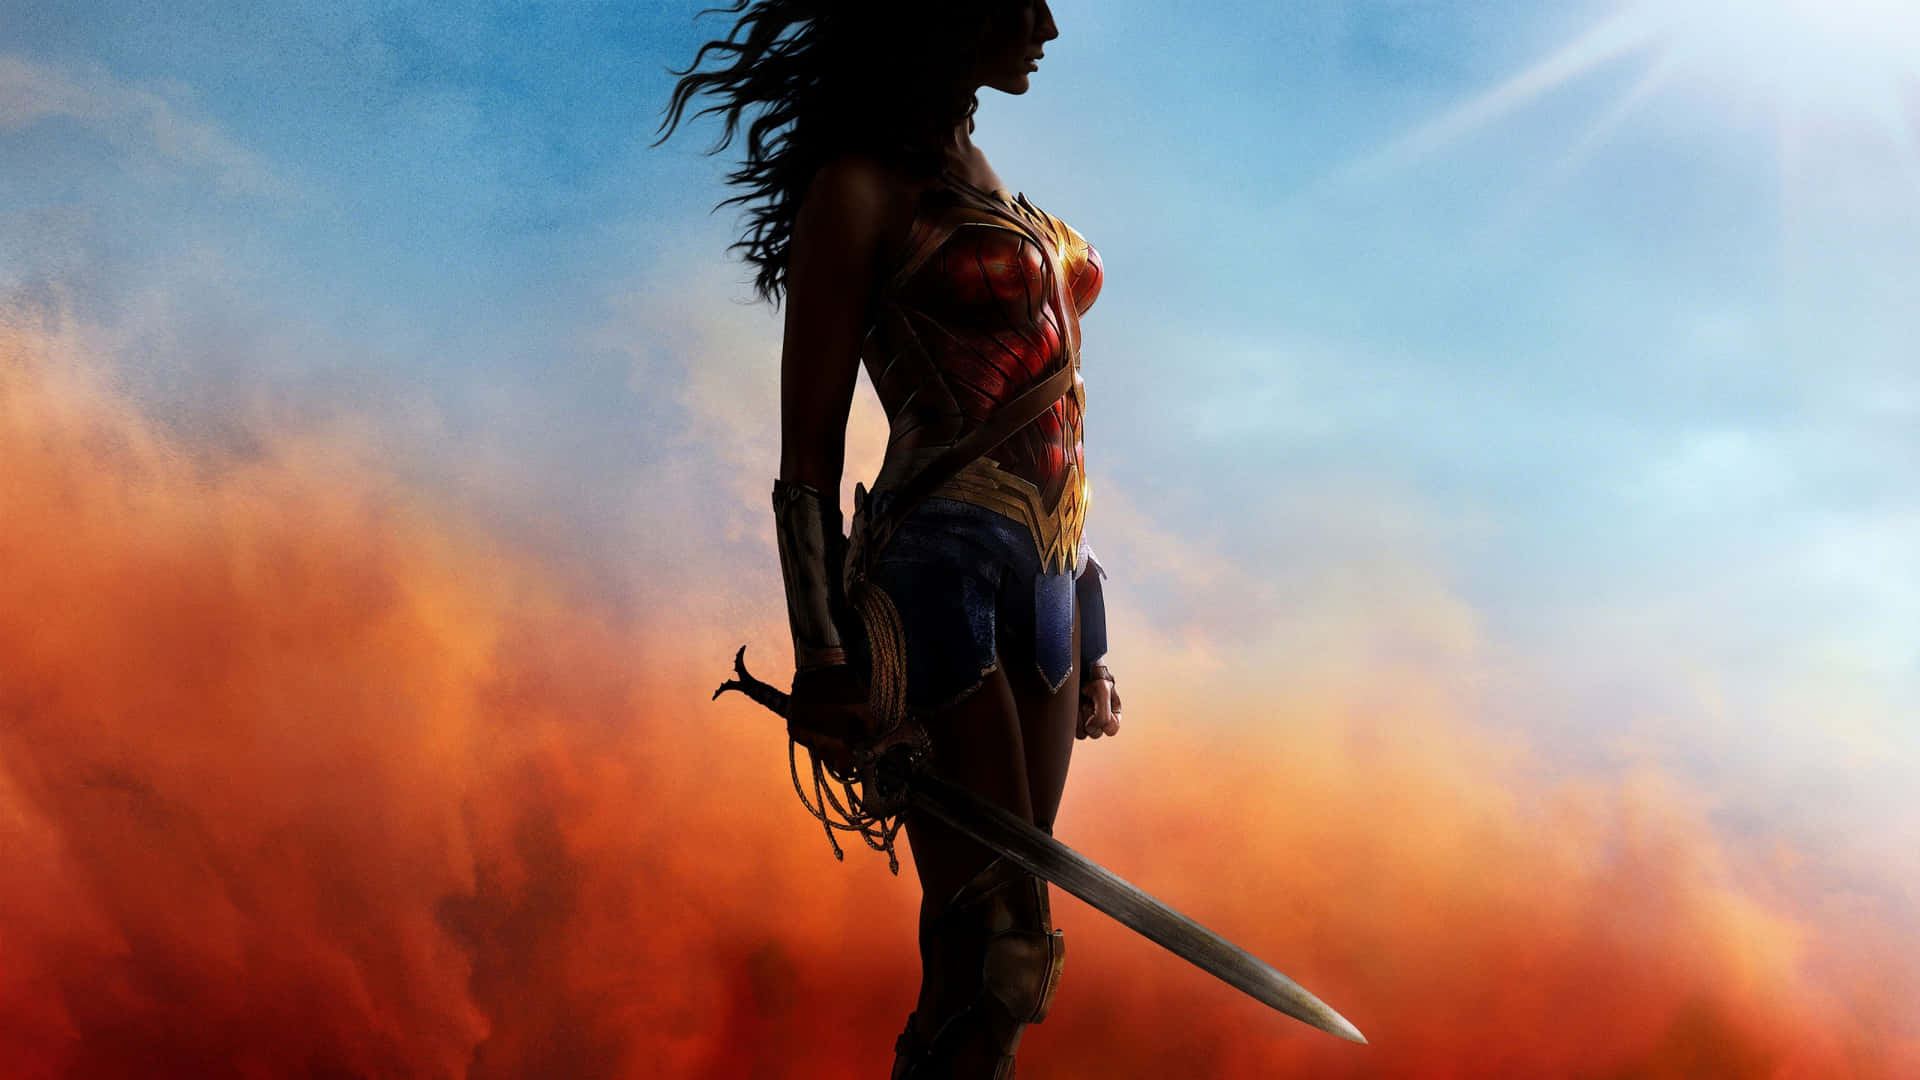 “Wonder Woman– Protecting the World”